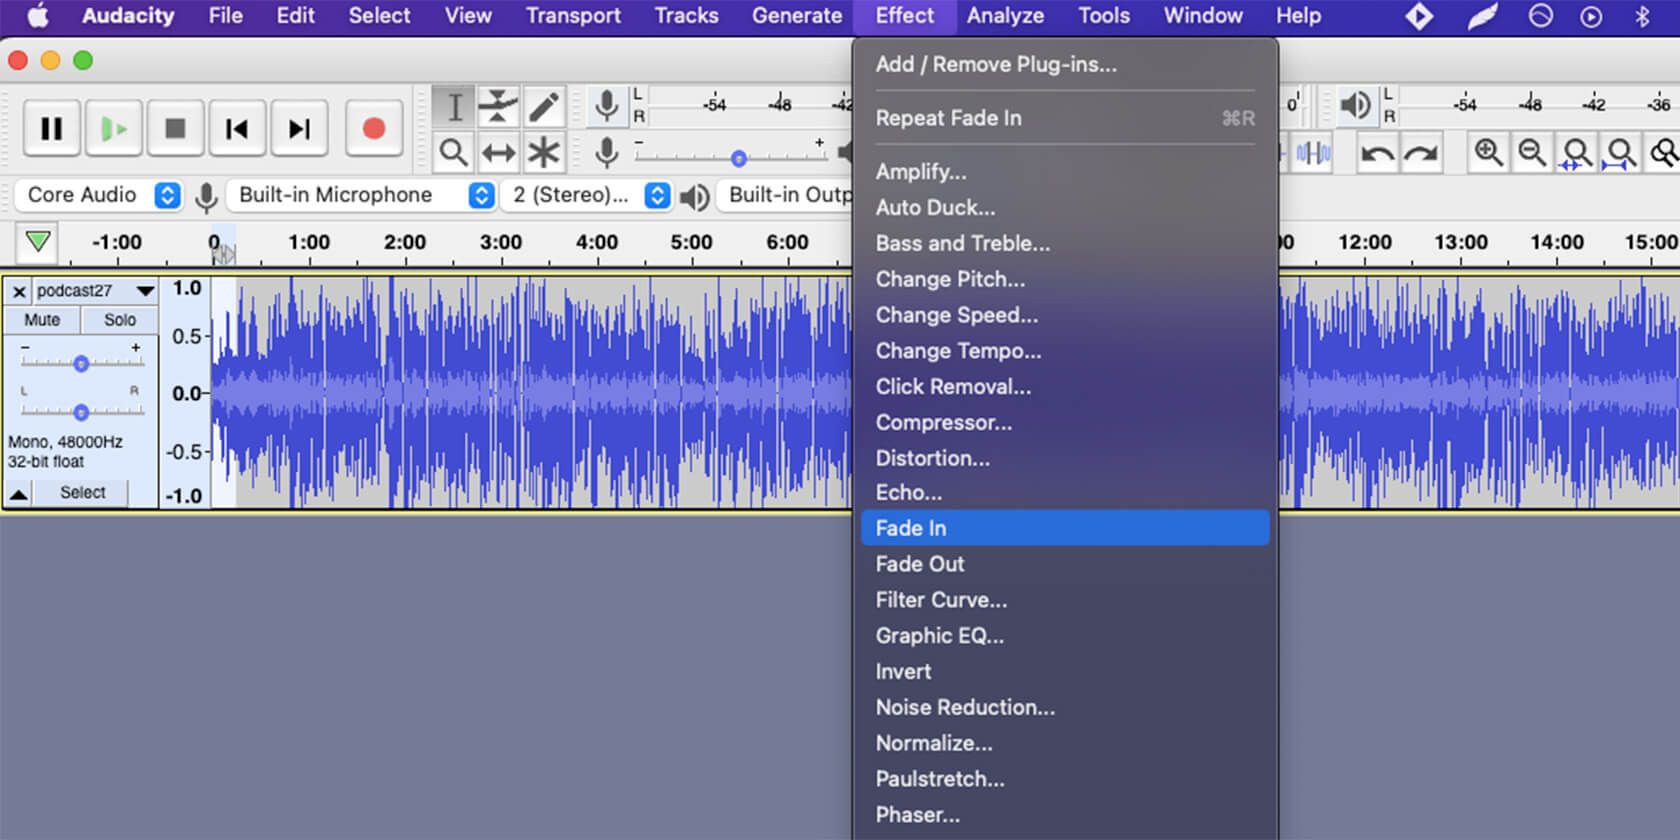 Fade in with Audacity